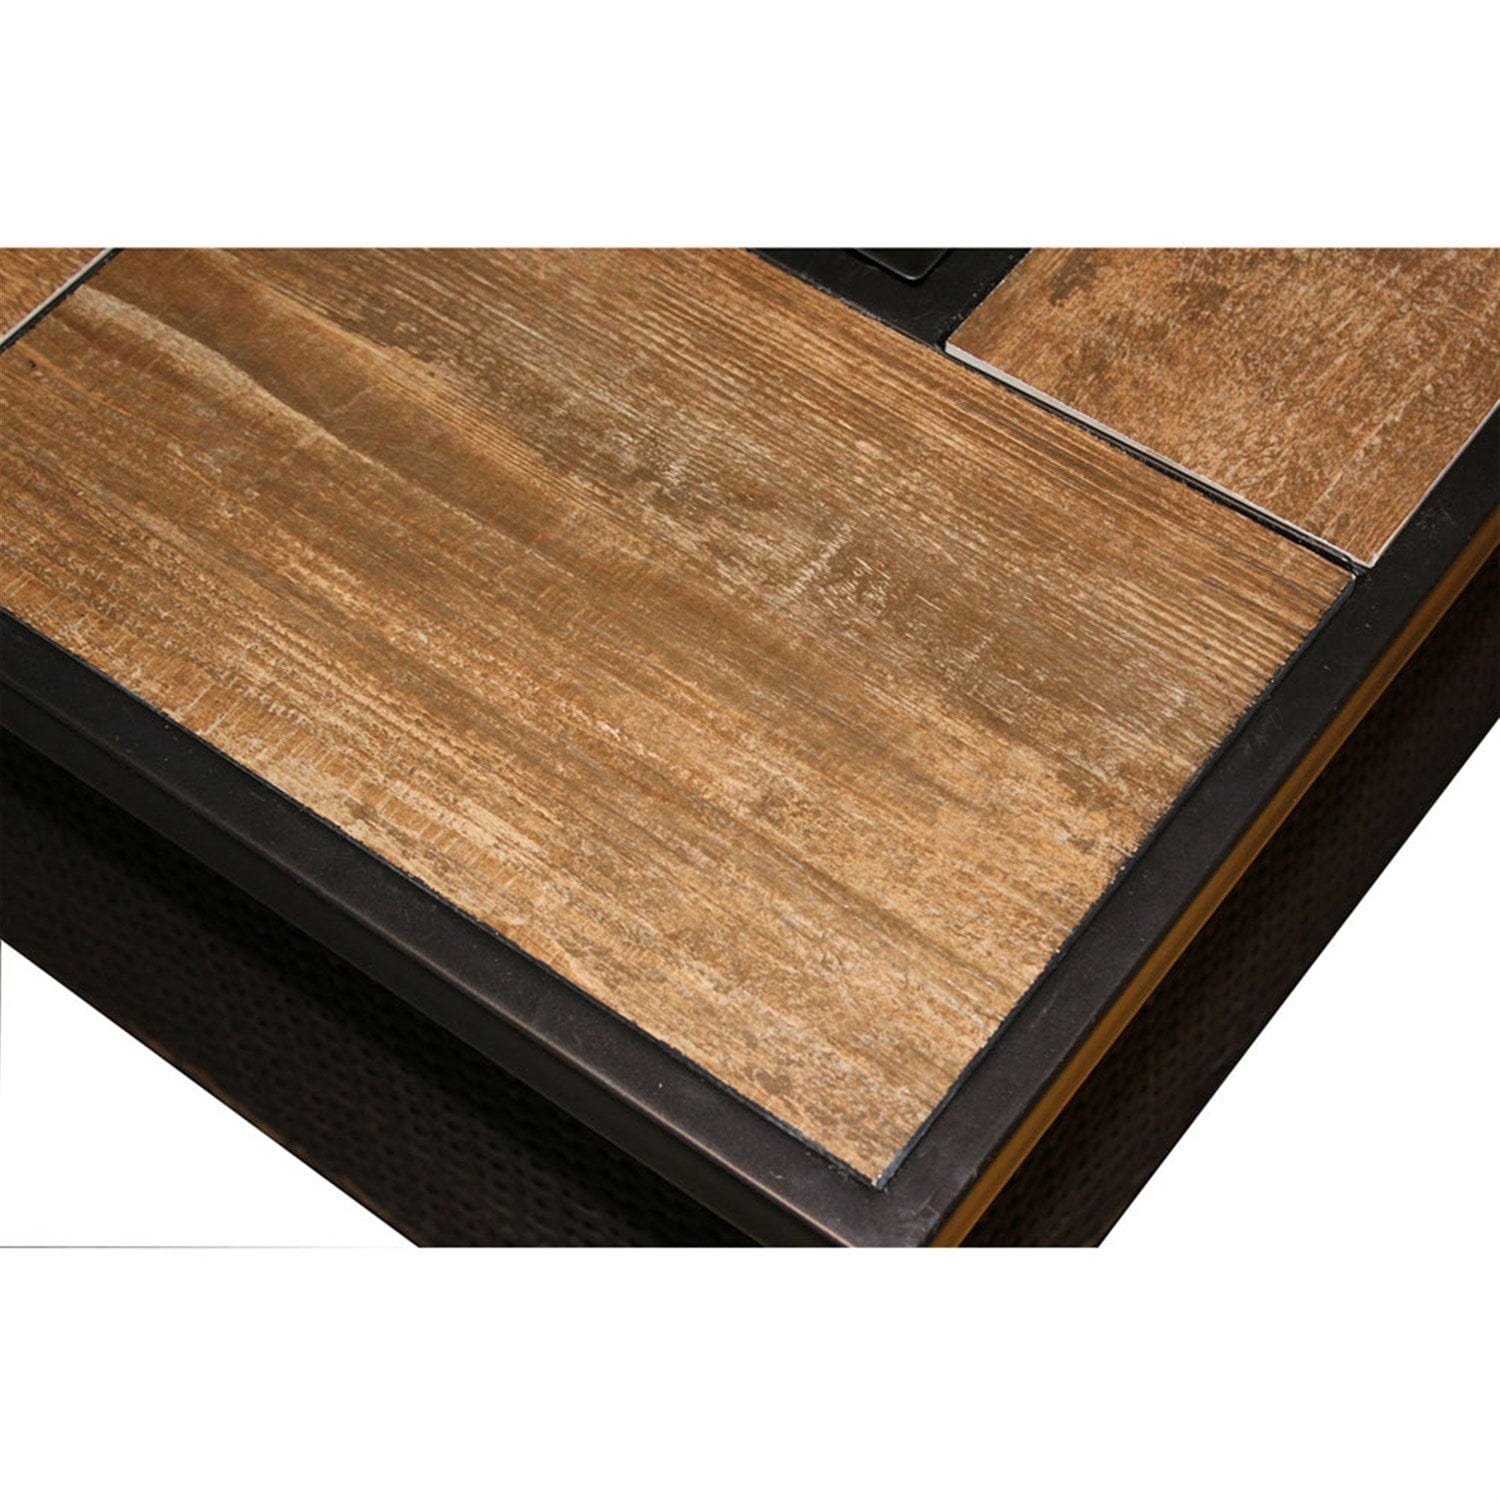 Hanover Fire Table Hanover- Woven 40,000 BTU Fire Pit Coffee Table with Woodgrain Tile-Top | 35x43 |  COFFEETBLFP-WG